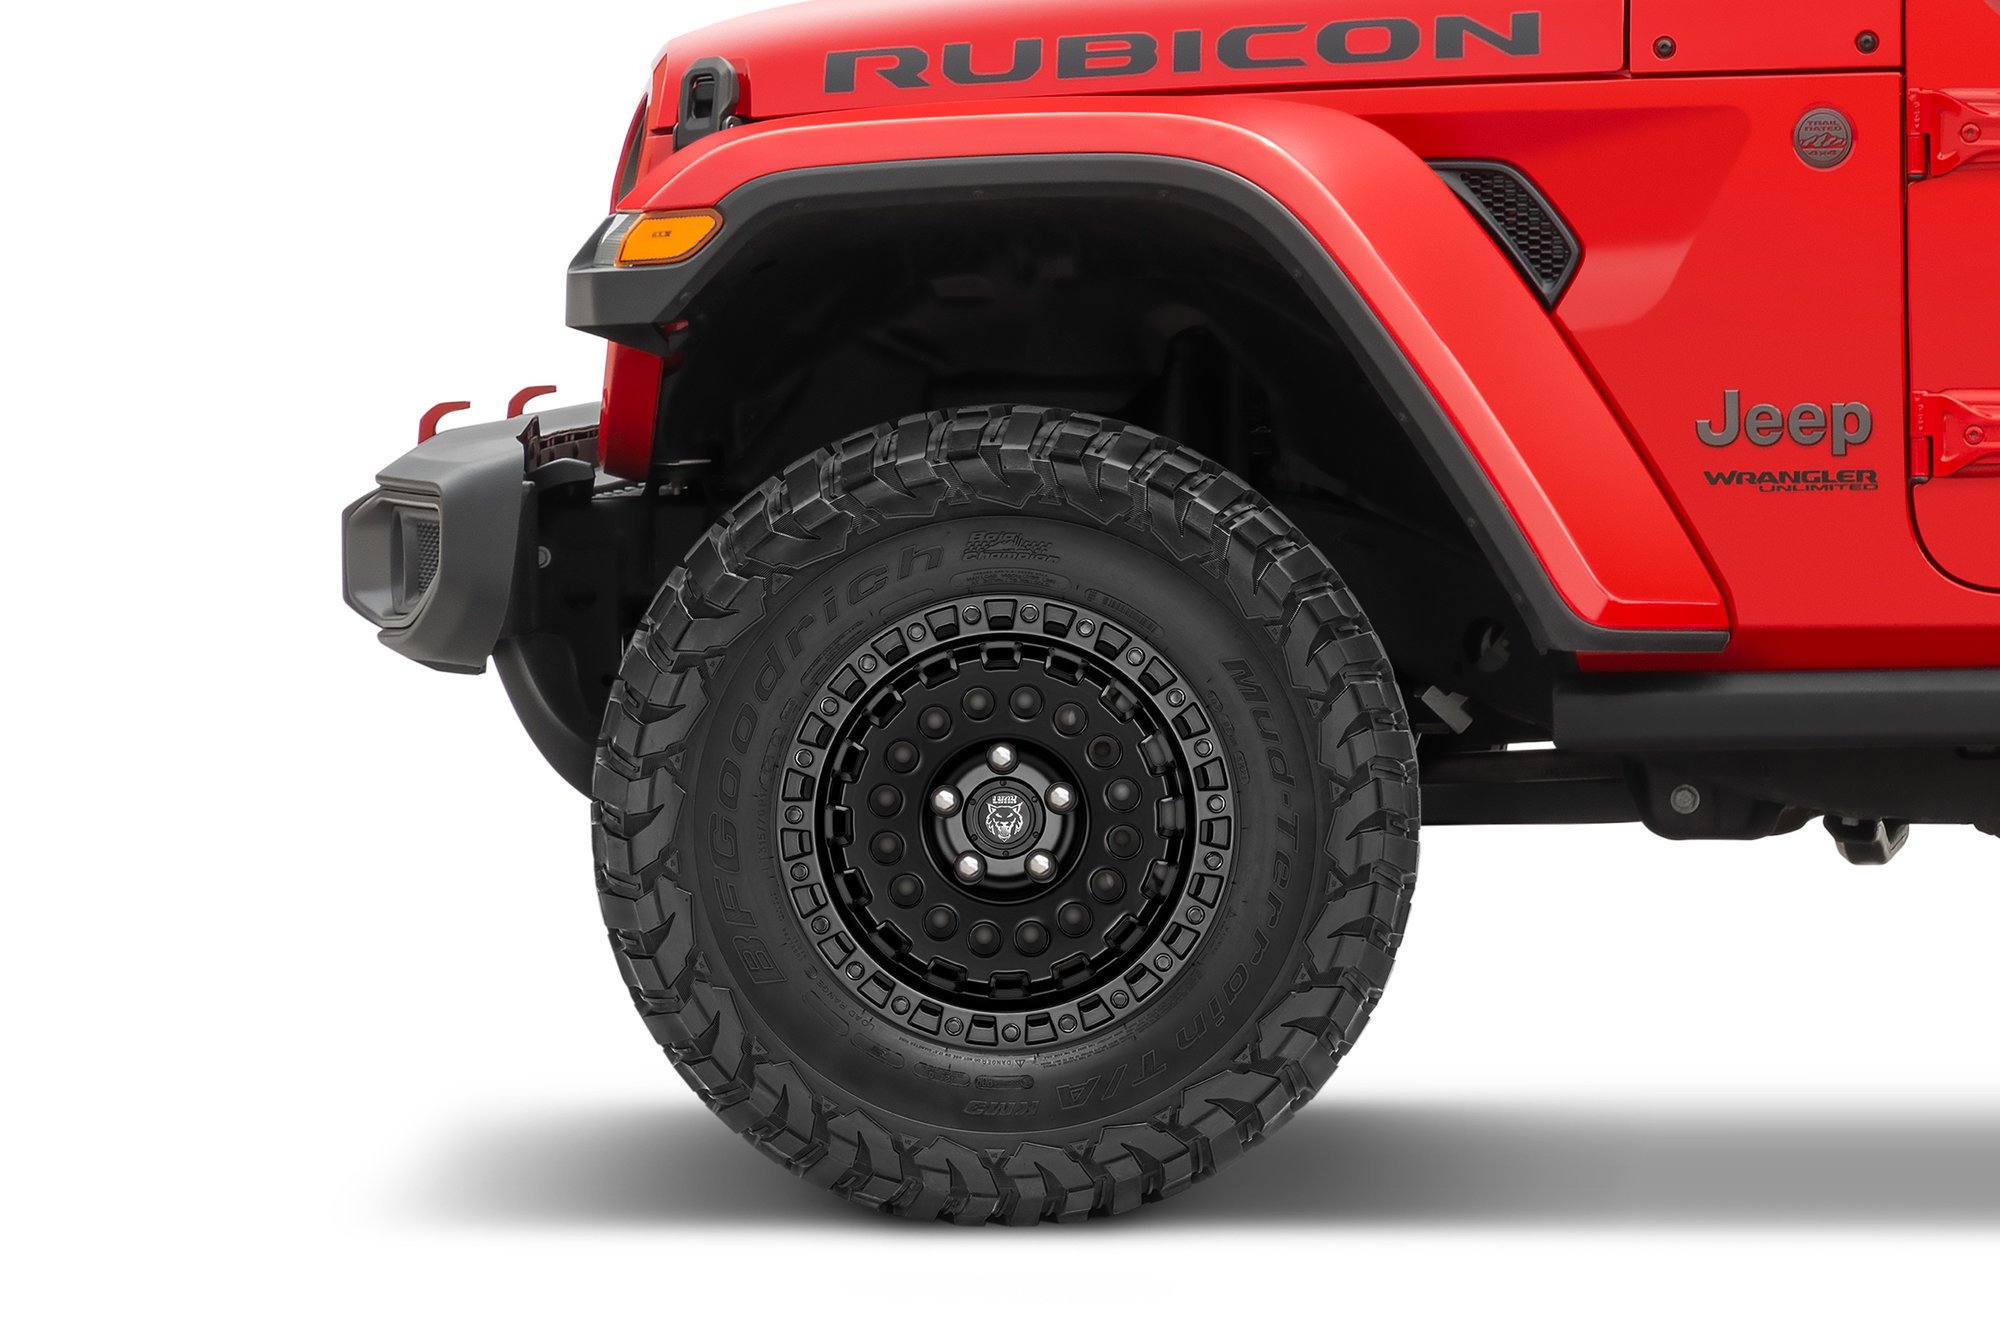 What Is The Best Jeep Wheel - Alloy or Steel? | Quadratec